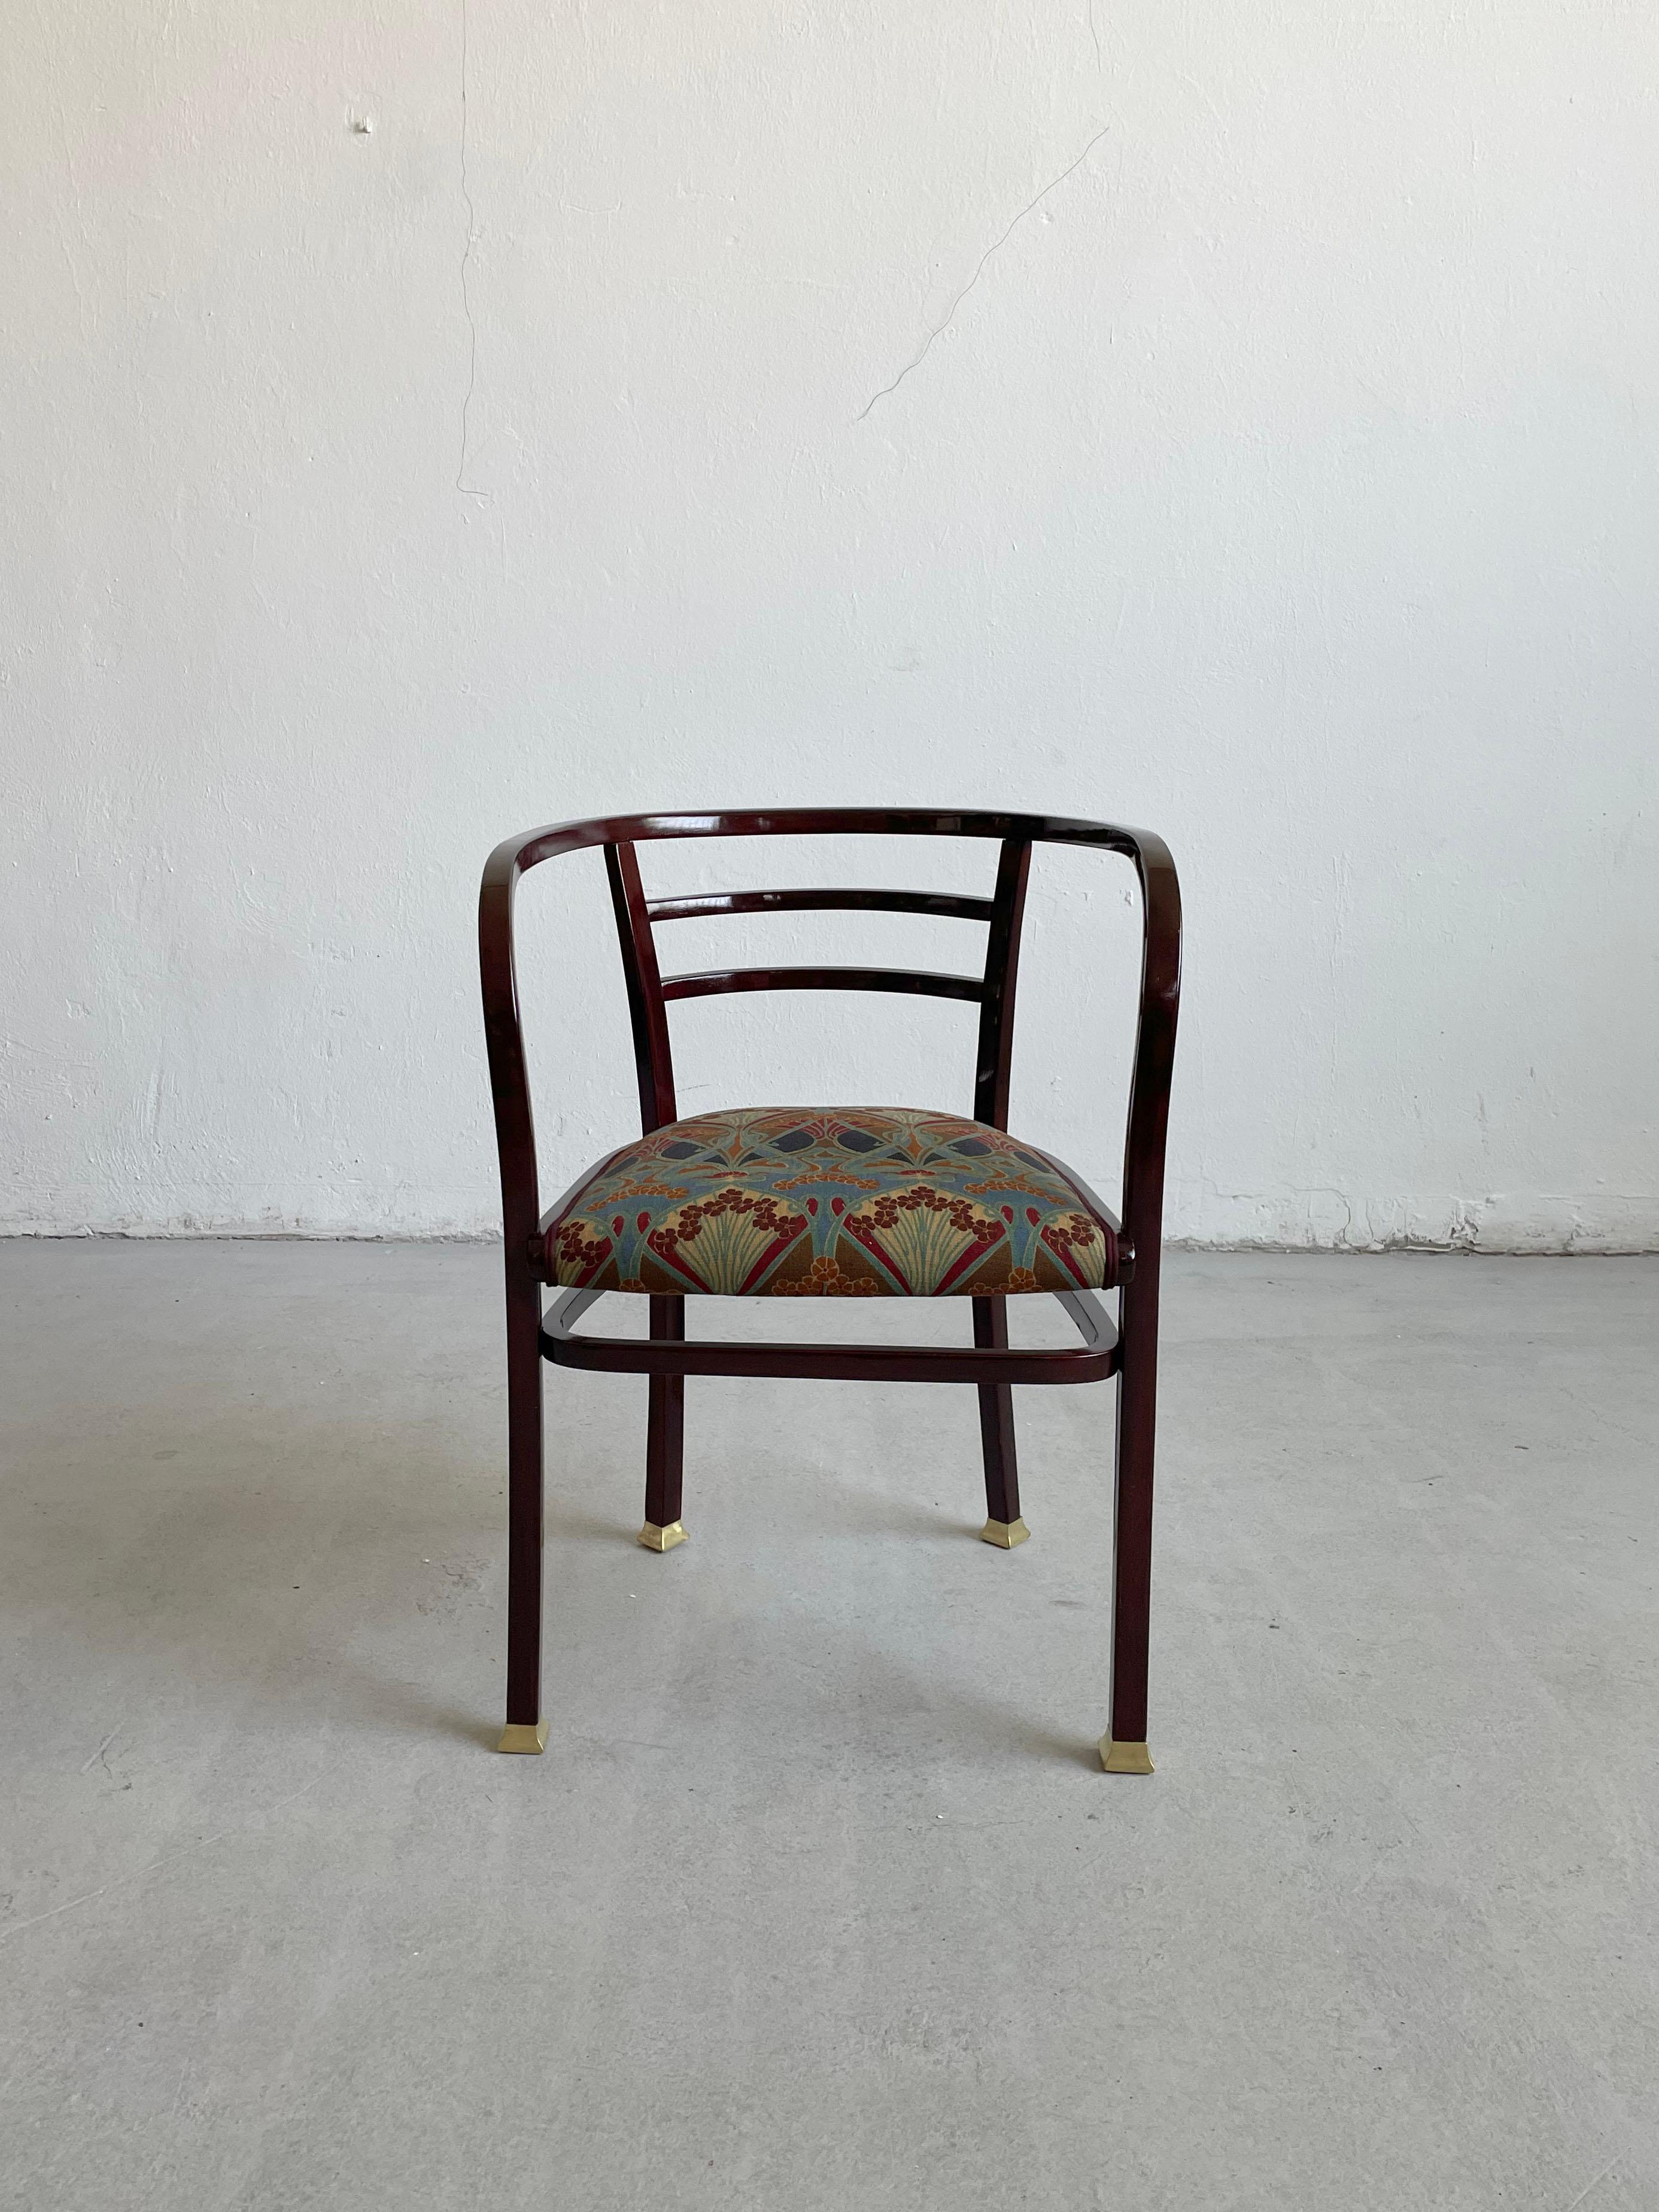 Otto Wagner, Fully Restored Armchair, 1902. Bentwood. For Thonet, Vienna.

The chair has been professionally restored and reupholstered in Liberty style fabric.

